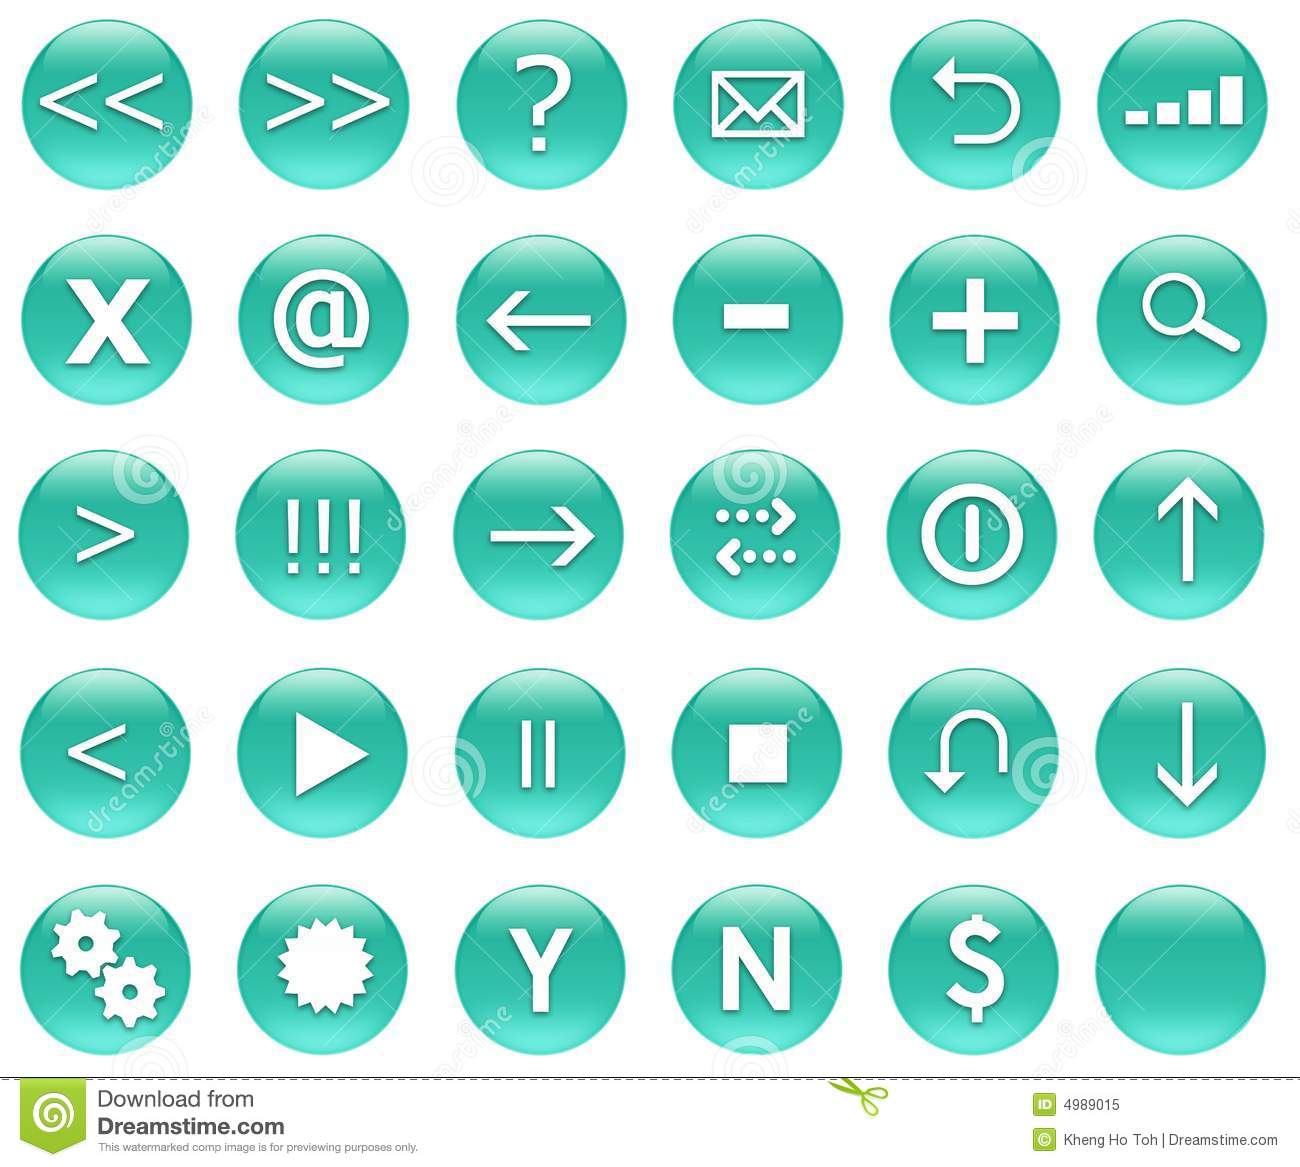 Free Navigation Button Icons